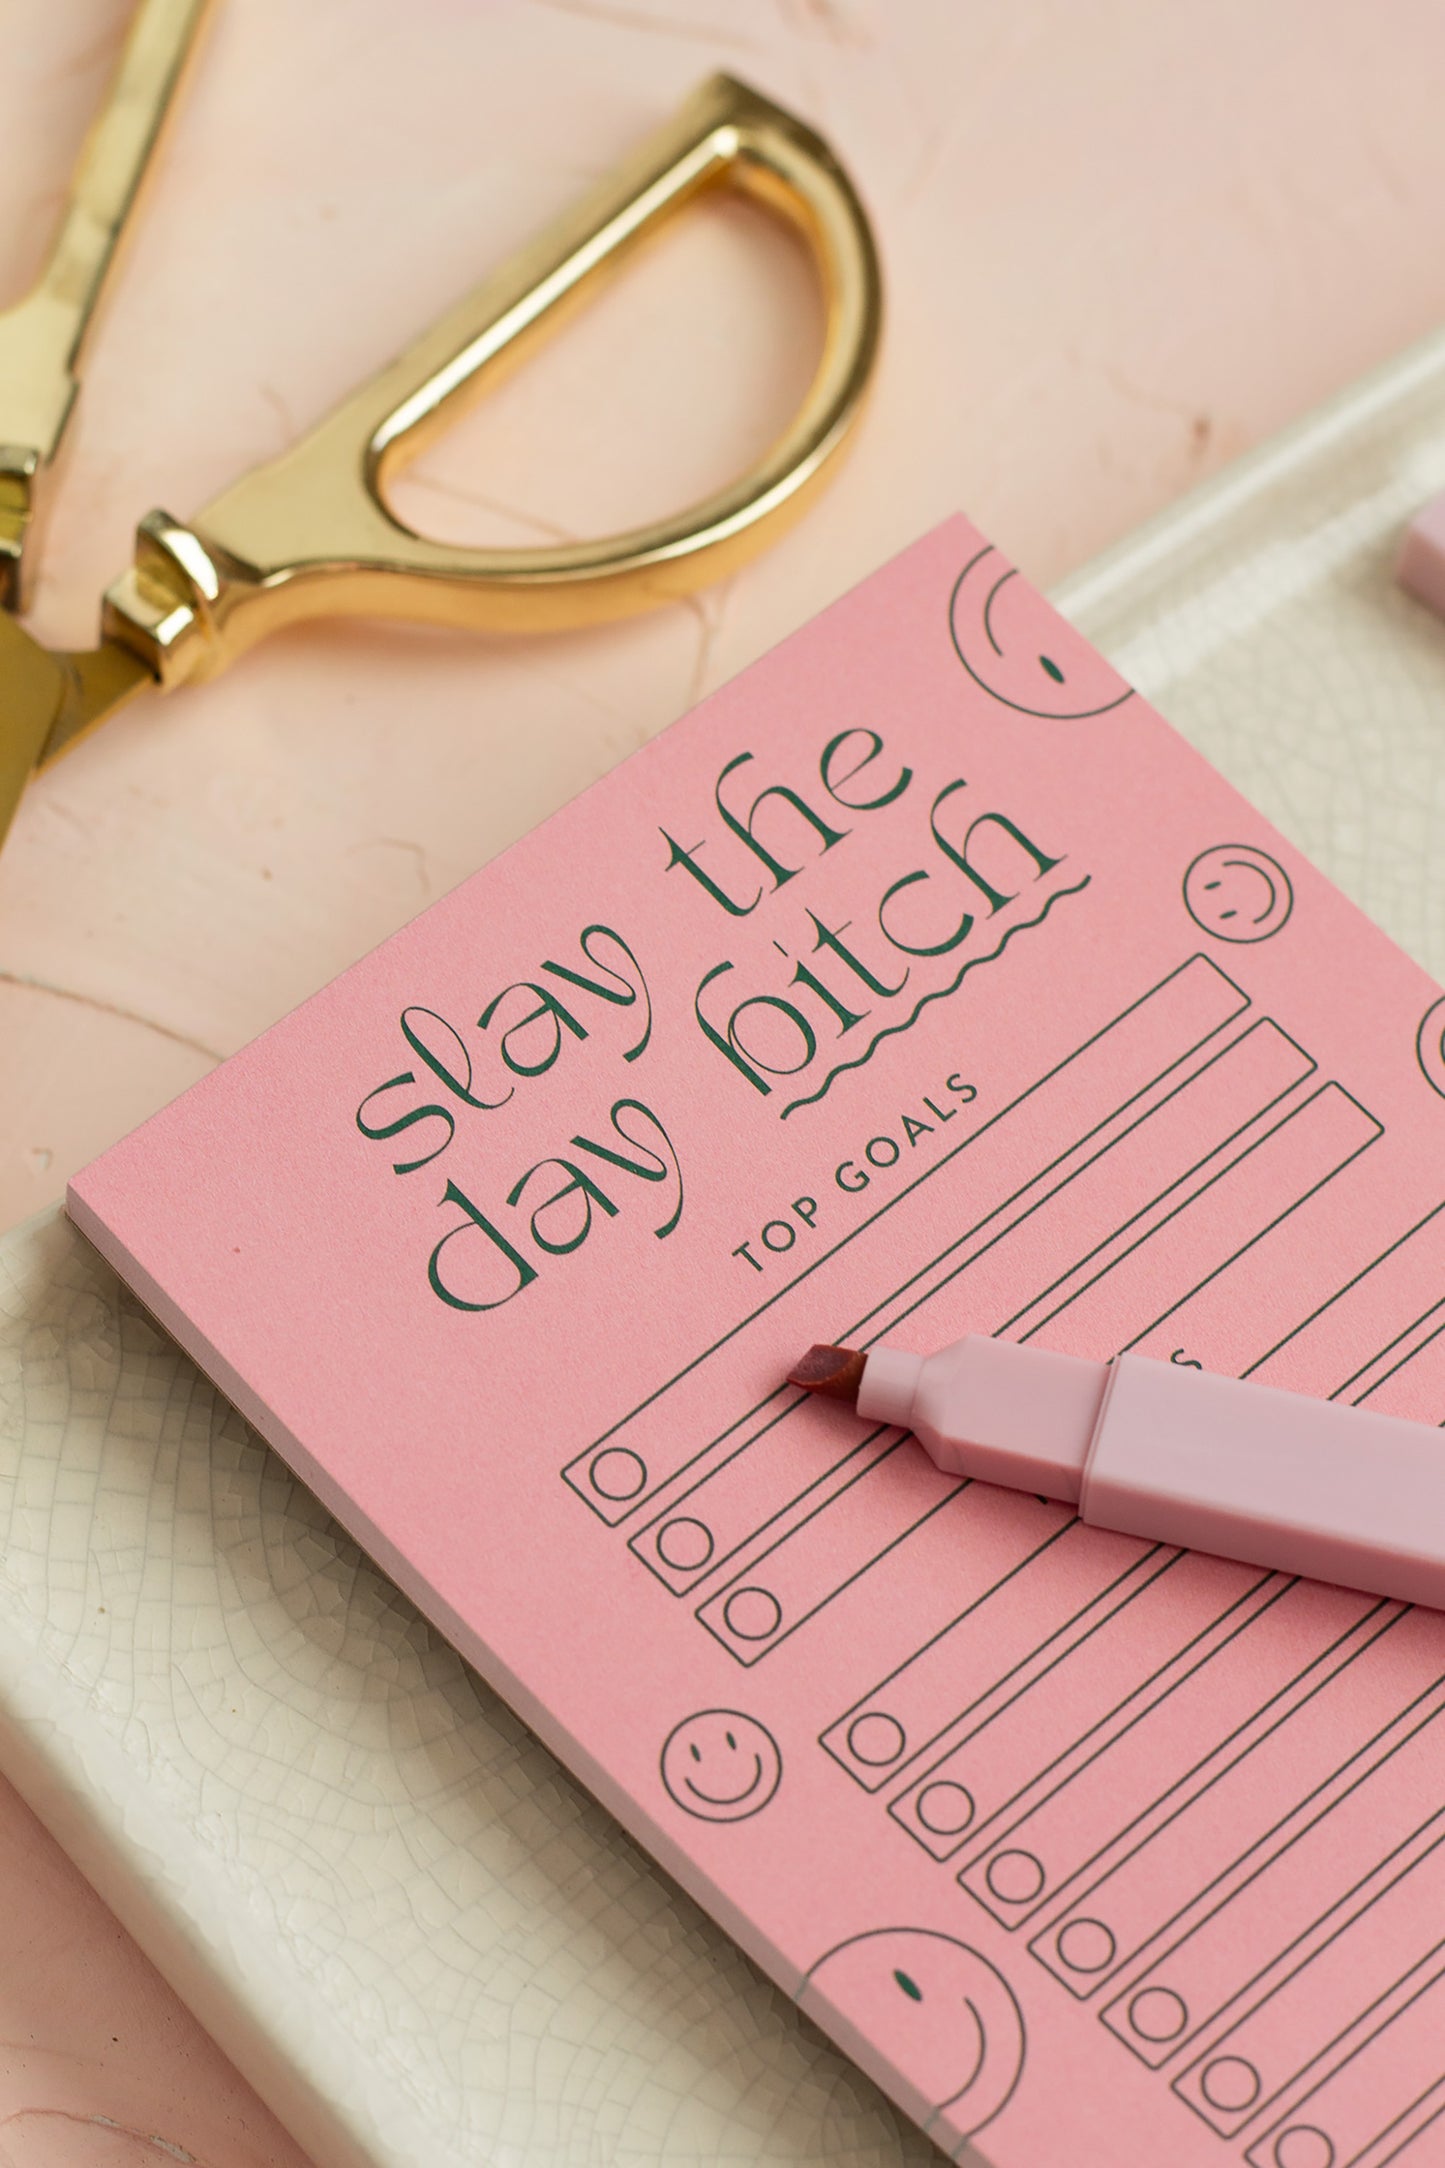 Funny notepads